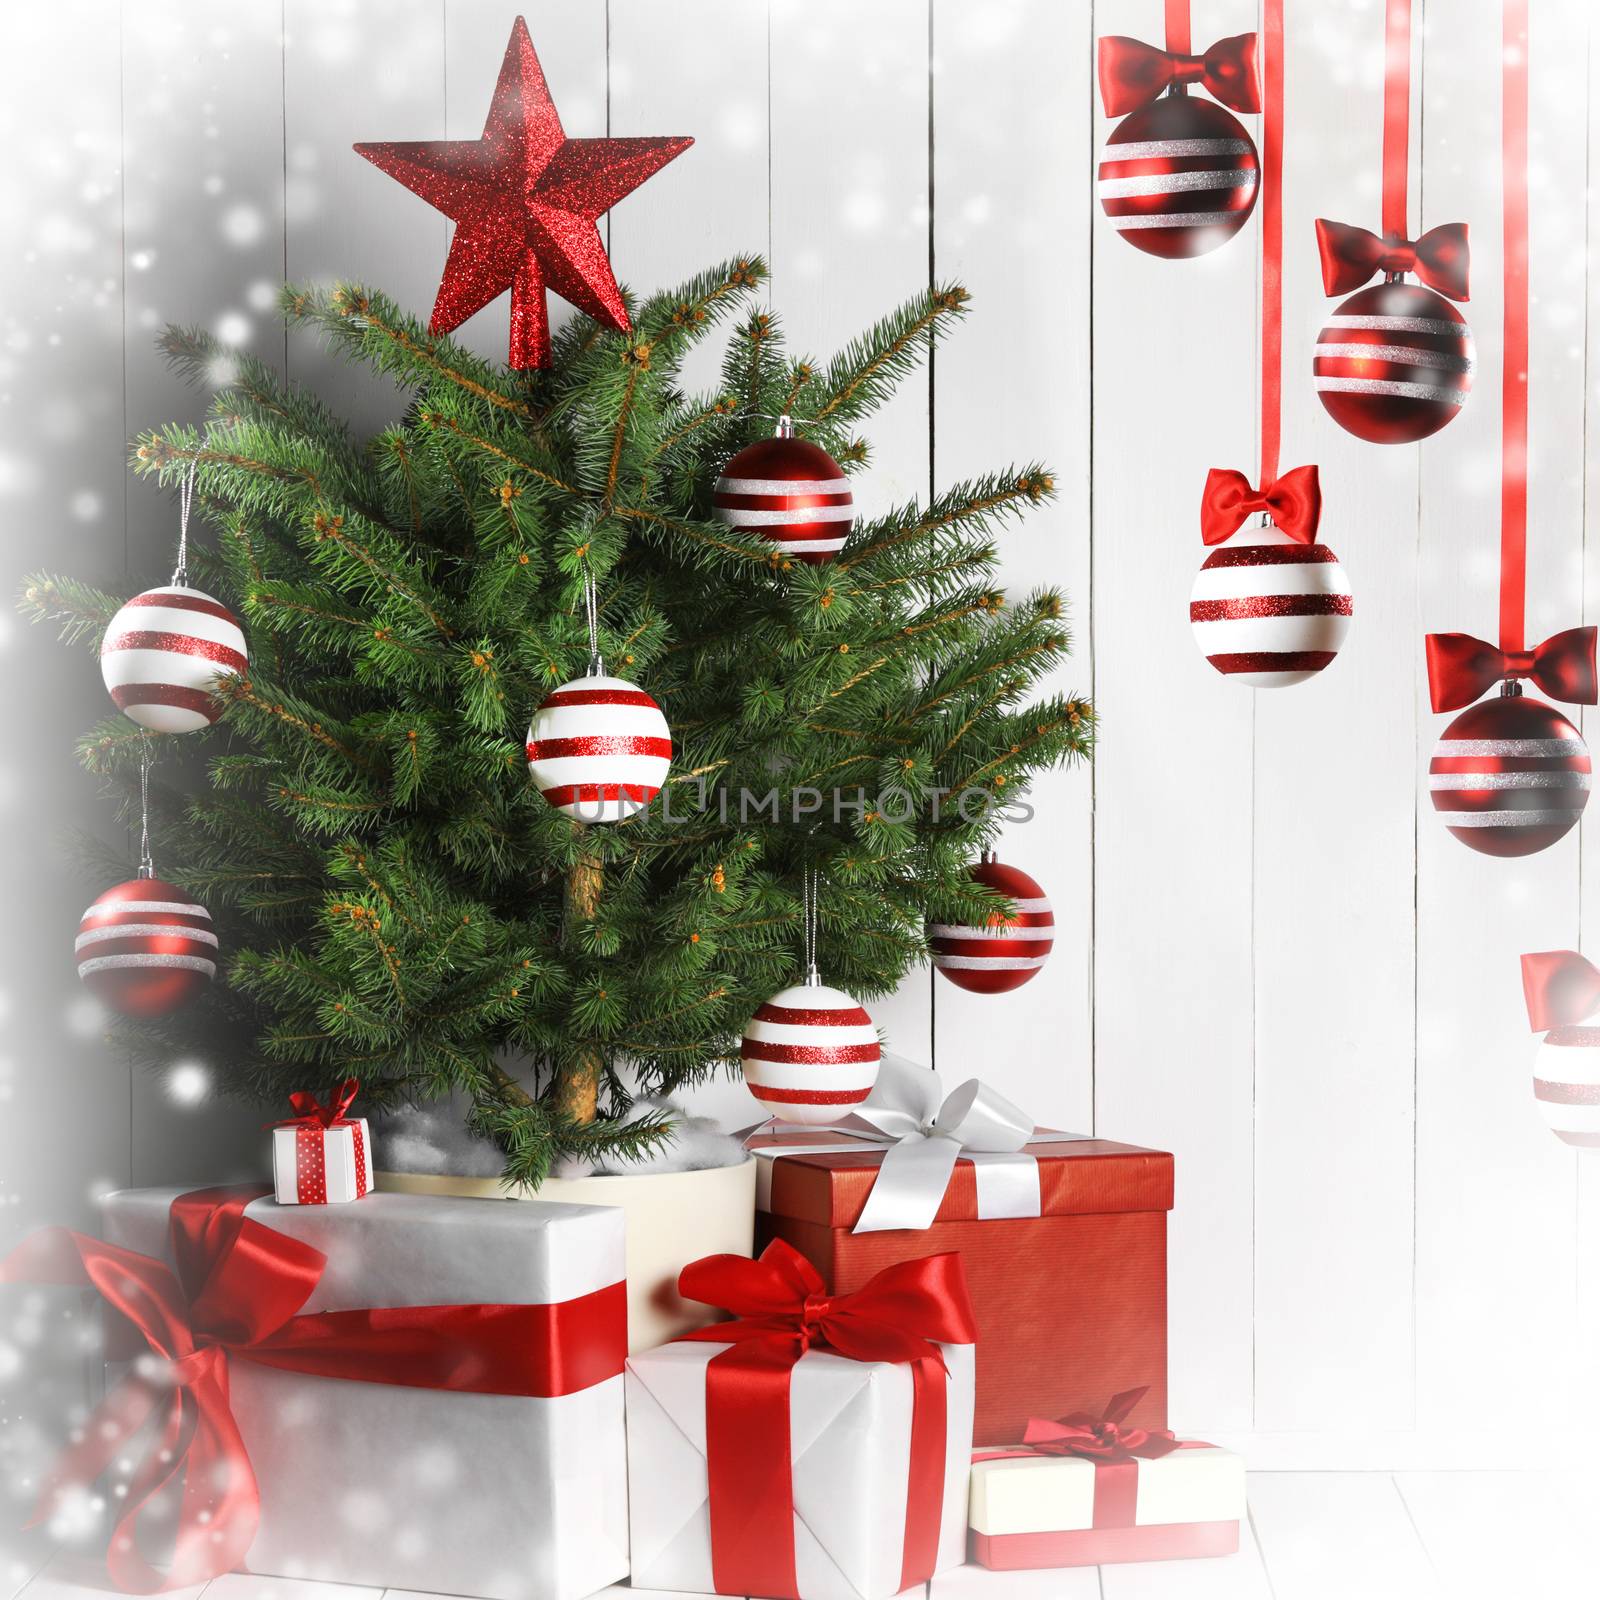 Merry christmas card with decorated christmas tree and gifts